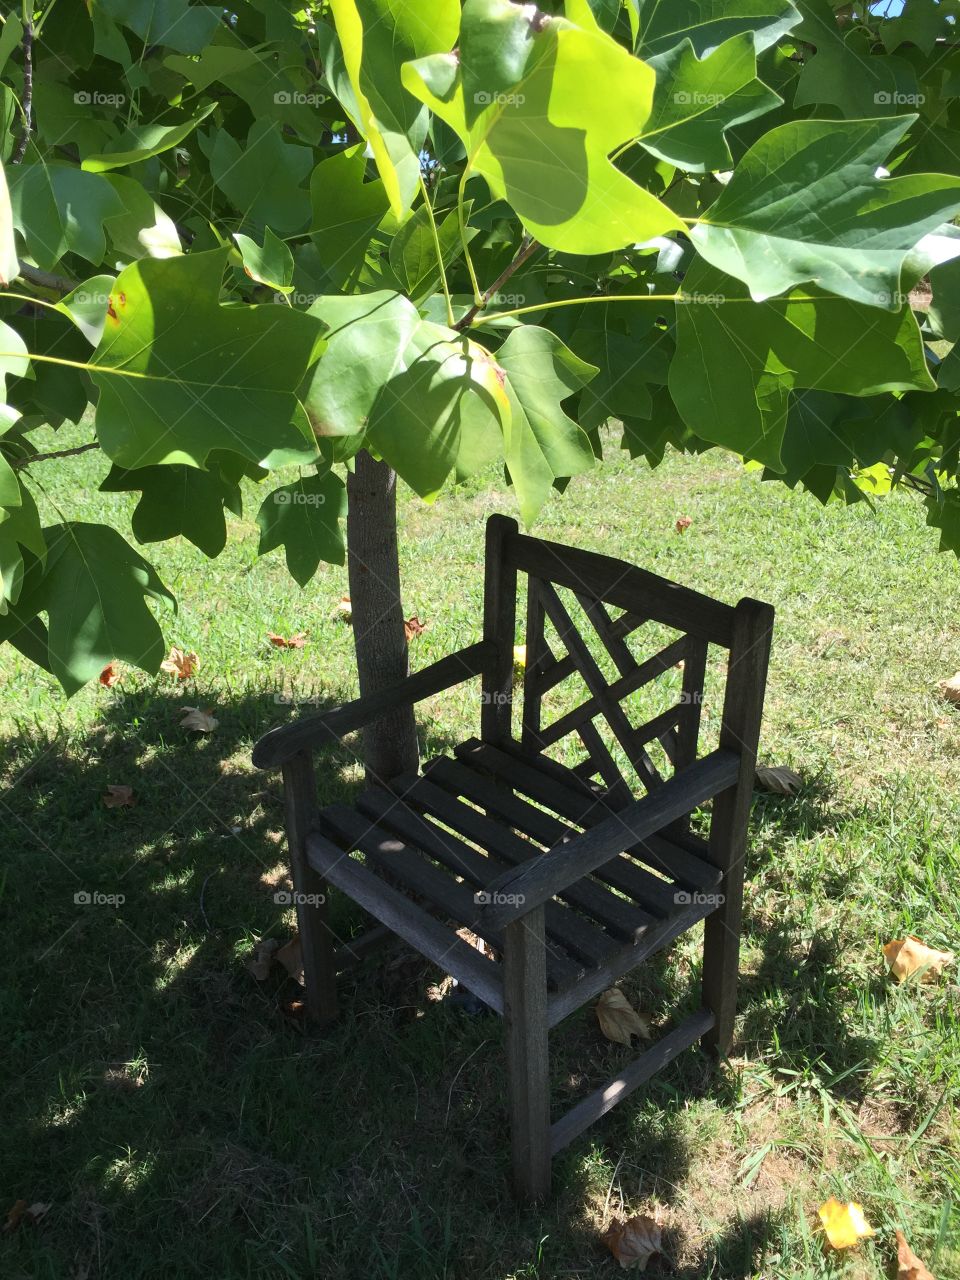 Empty chair in shadow of apple tree